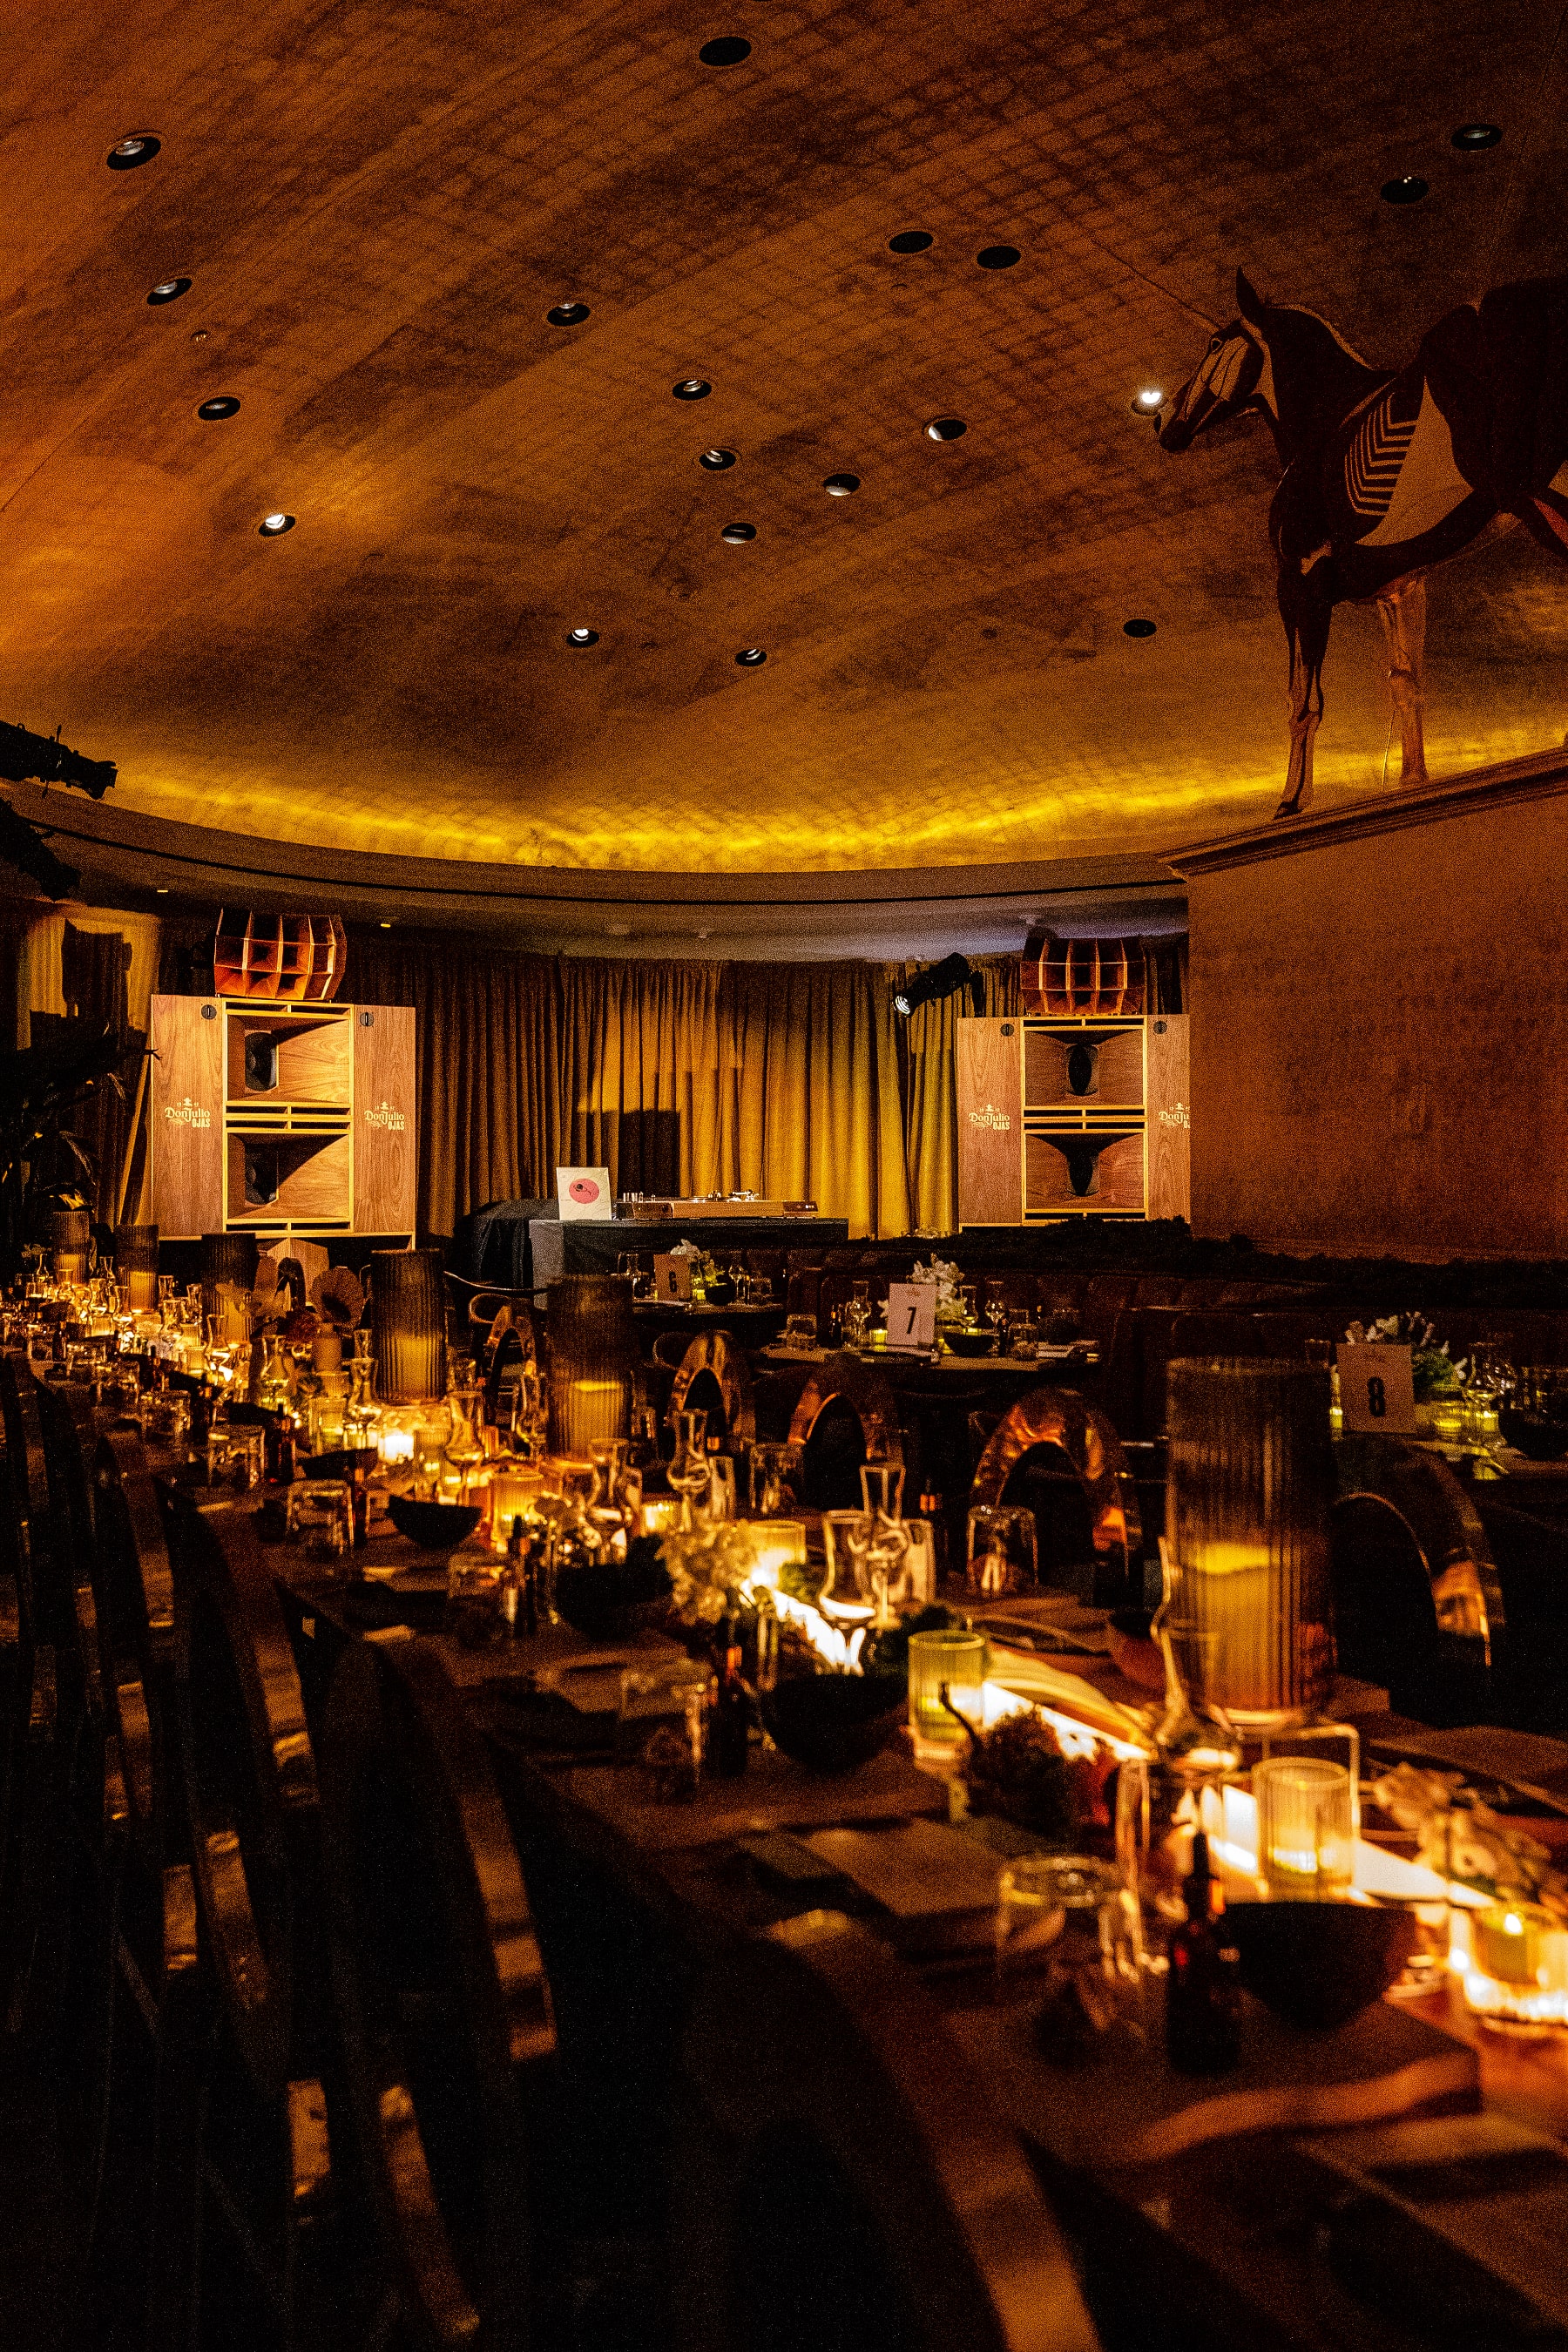 The collaboration debuted during Miami Art Week at a private event hosted by Tequila Don Julio and Devon Turnbull, for a one-of-a-kind listening, dinner and Don Julio 1942 tasting experience.